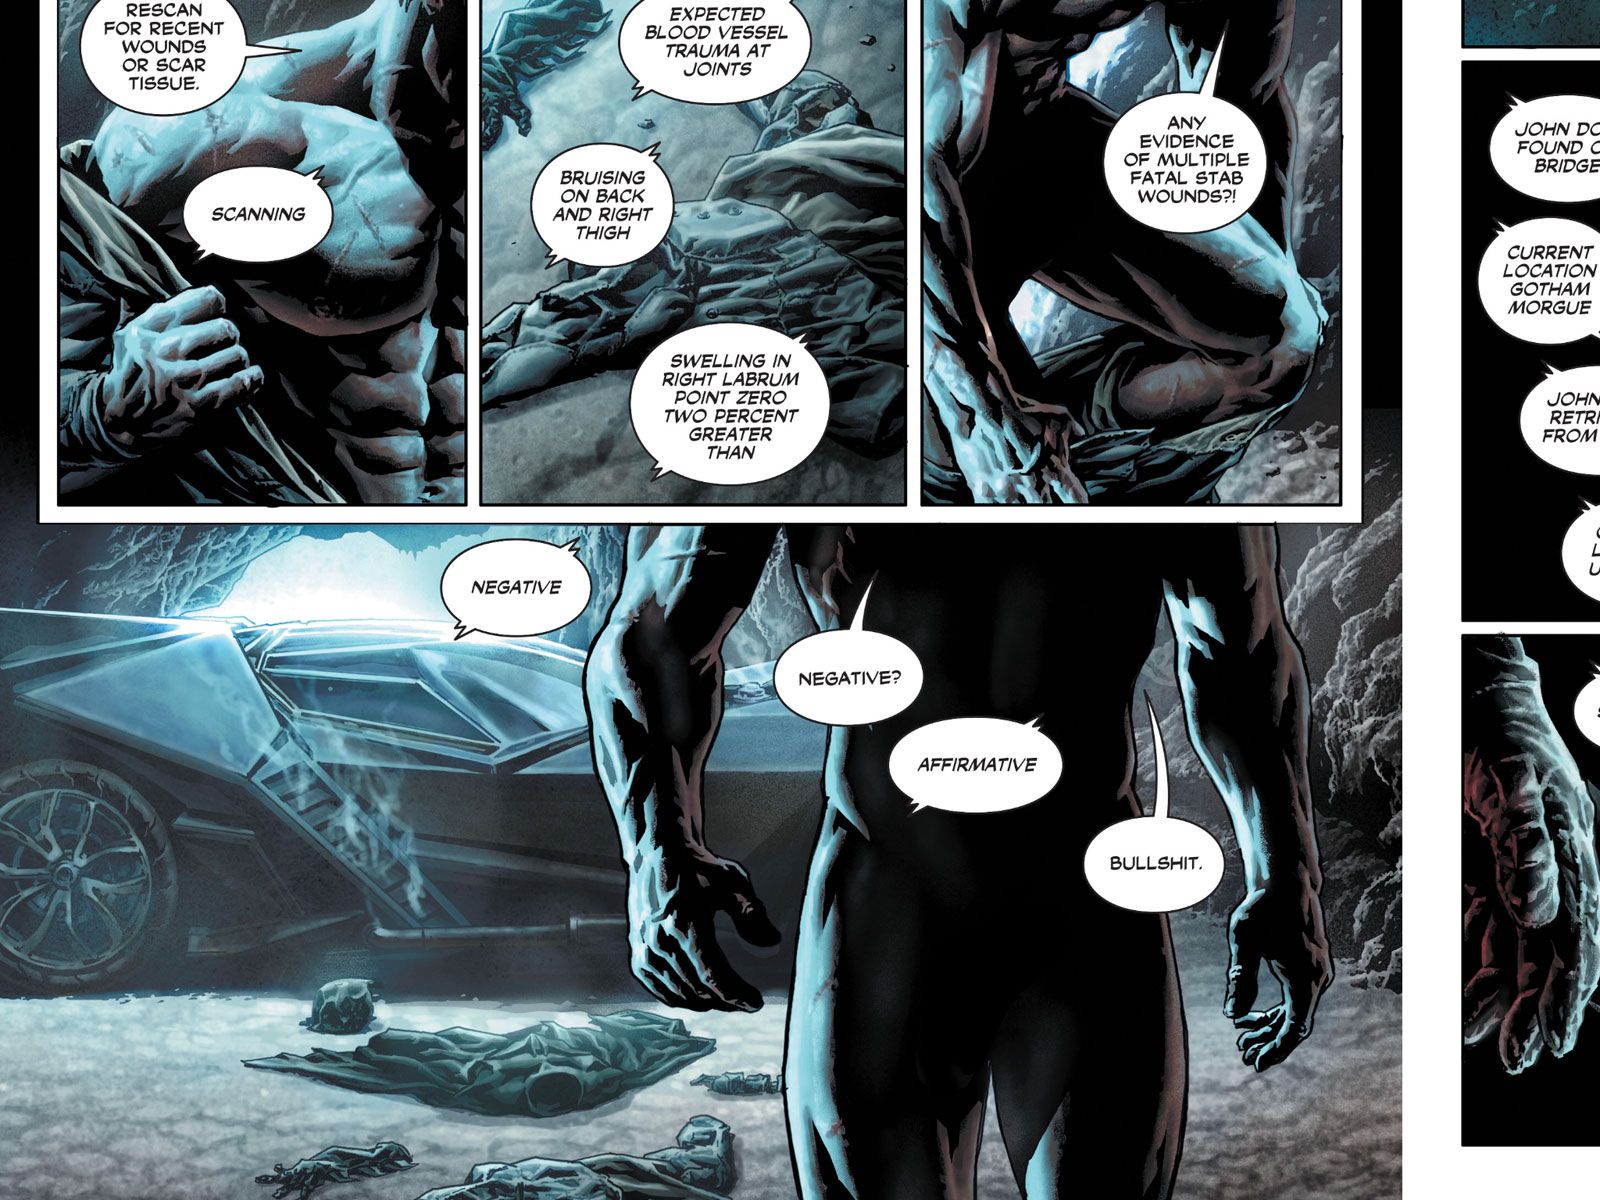 DC exposes Batman's 'Batdick' for the first time - immediately regrets it -  WE THE PVBLIC